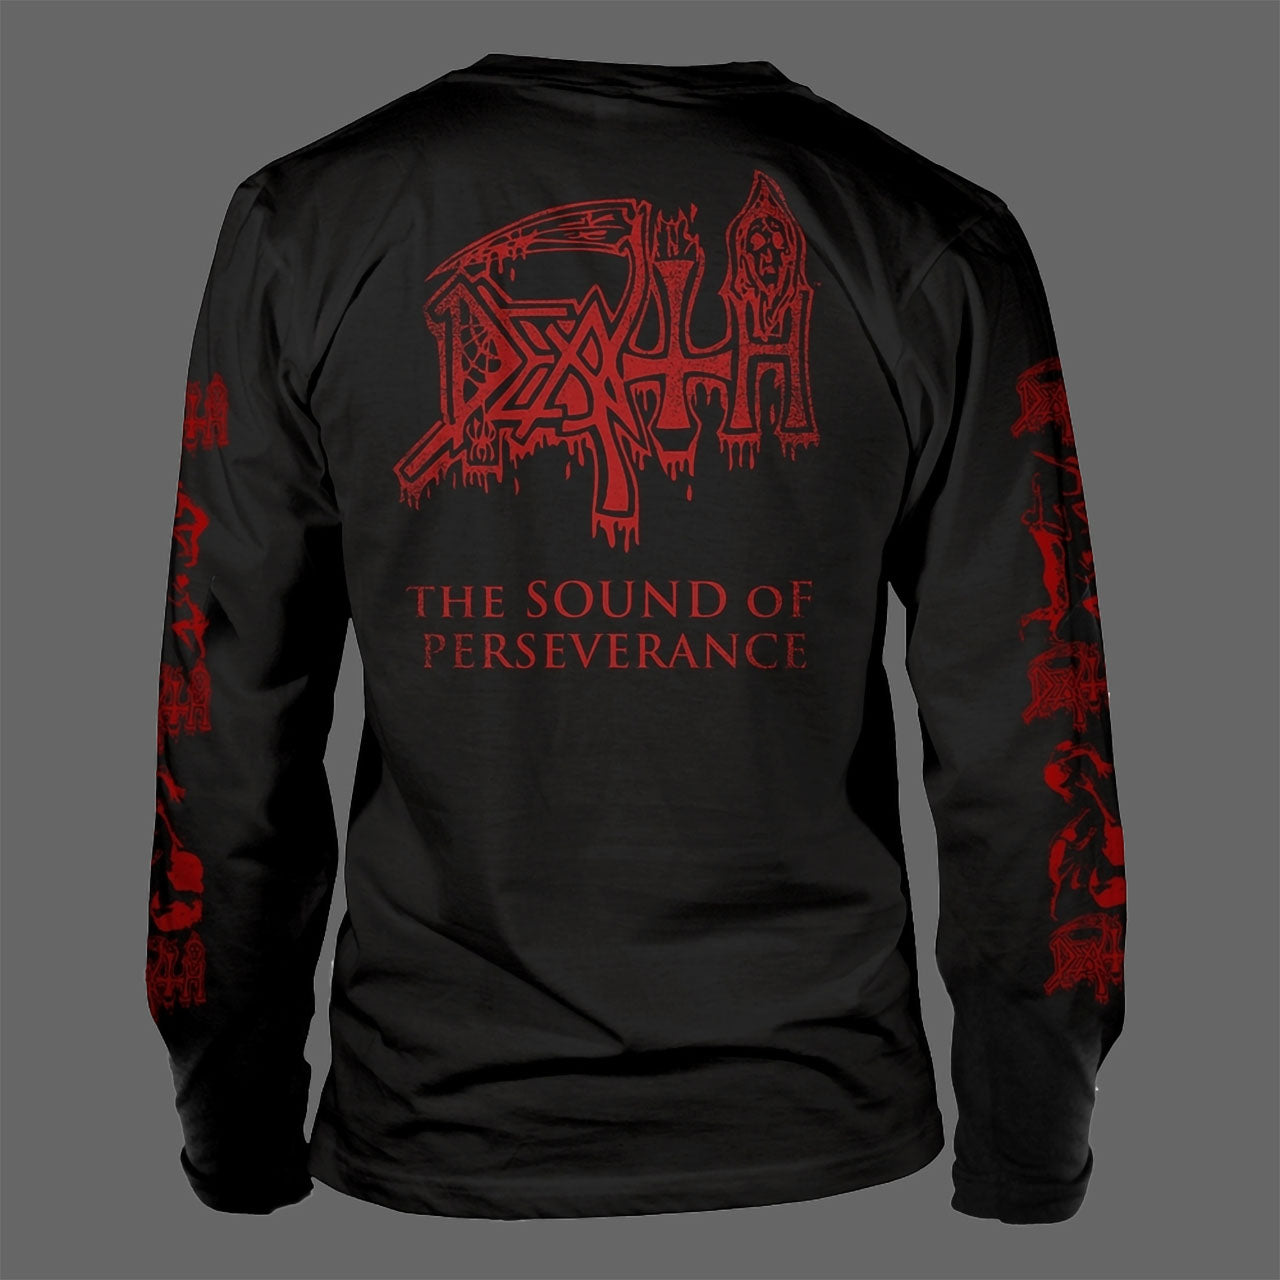 Death - The Sound of Perseverance (Black) (Long Sleeve T-Shirt)